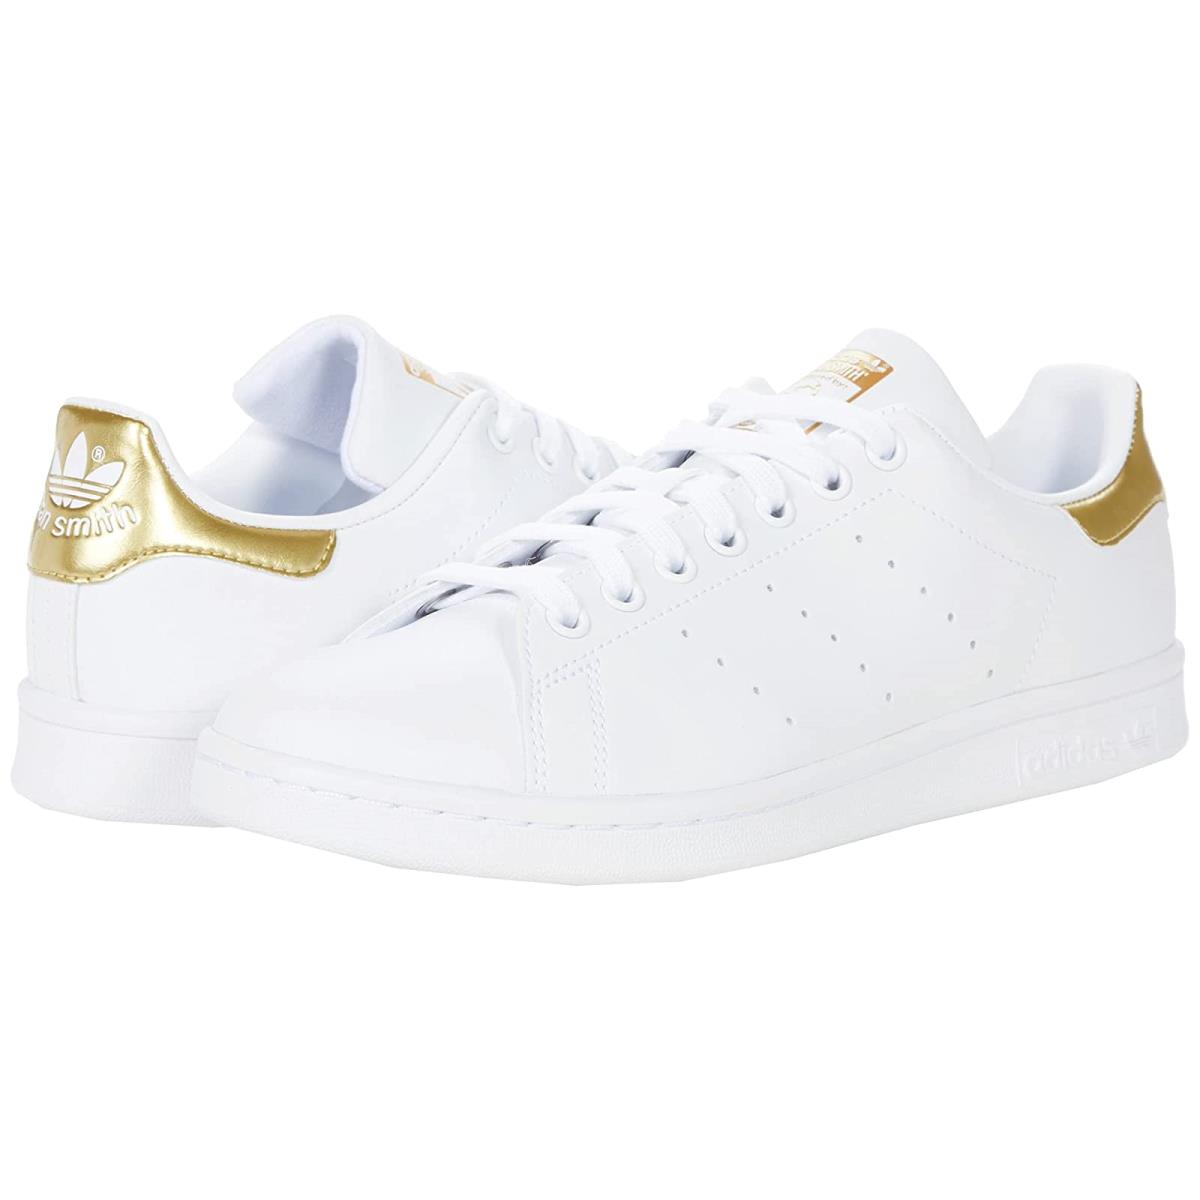 Woman`s Sneakers Athletic Shoes Adidas Originals Stan Smith Footwear White/Footwear White/Gold Metallic 1